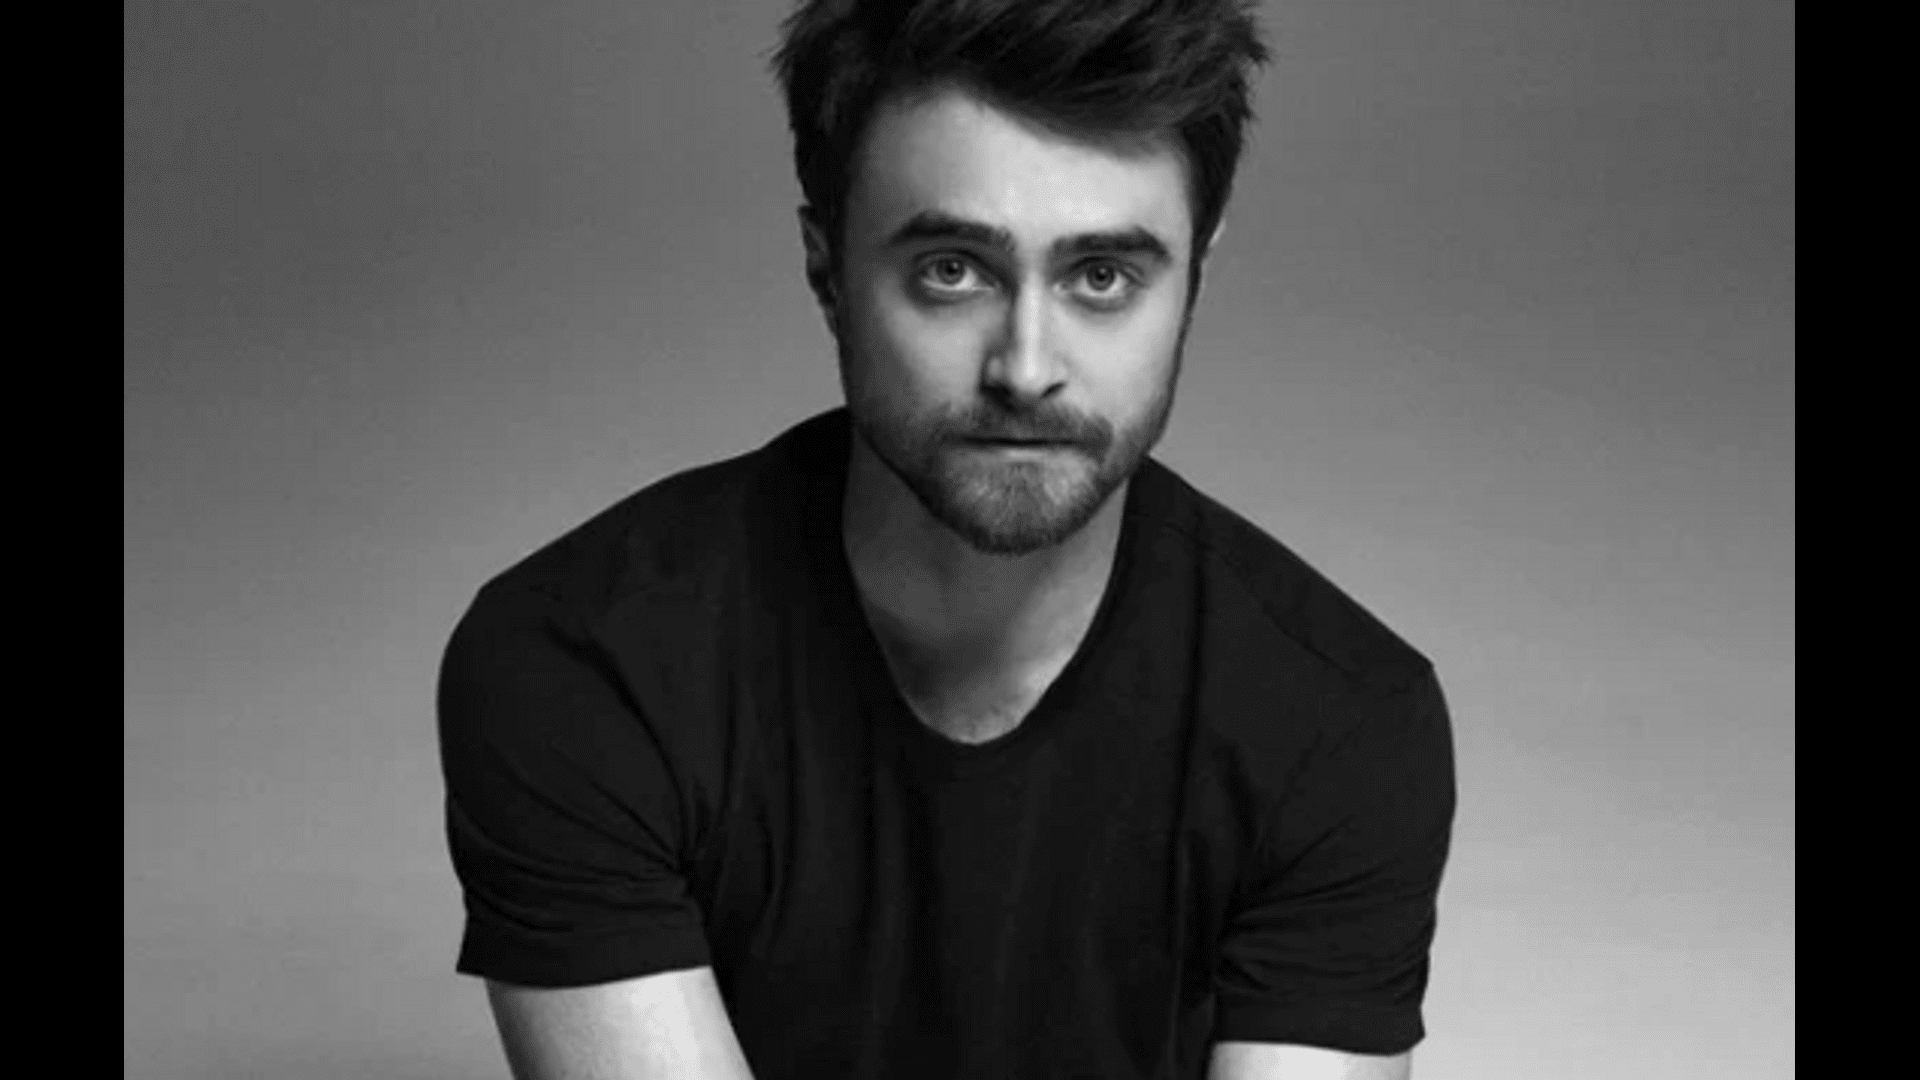 daniel-radcliffe-is-not-interested-in-playing-harry-potter-again-in-the-cursed-child